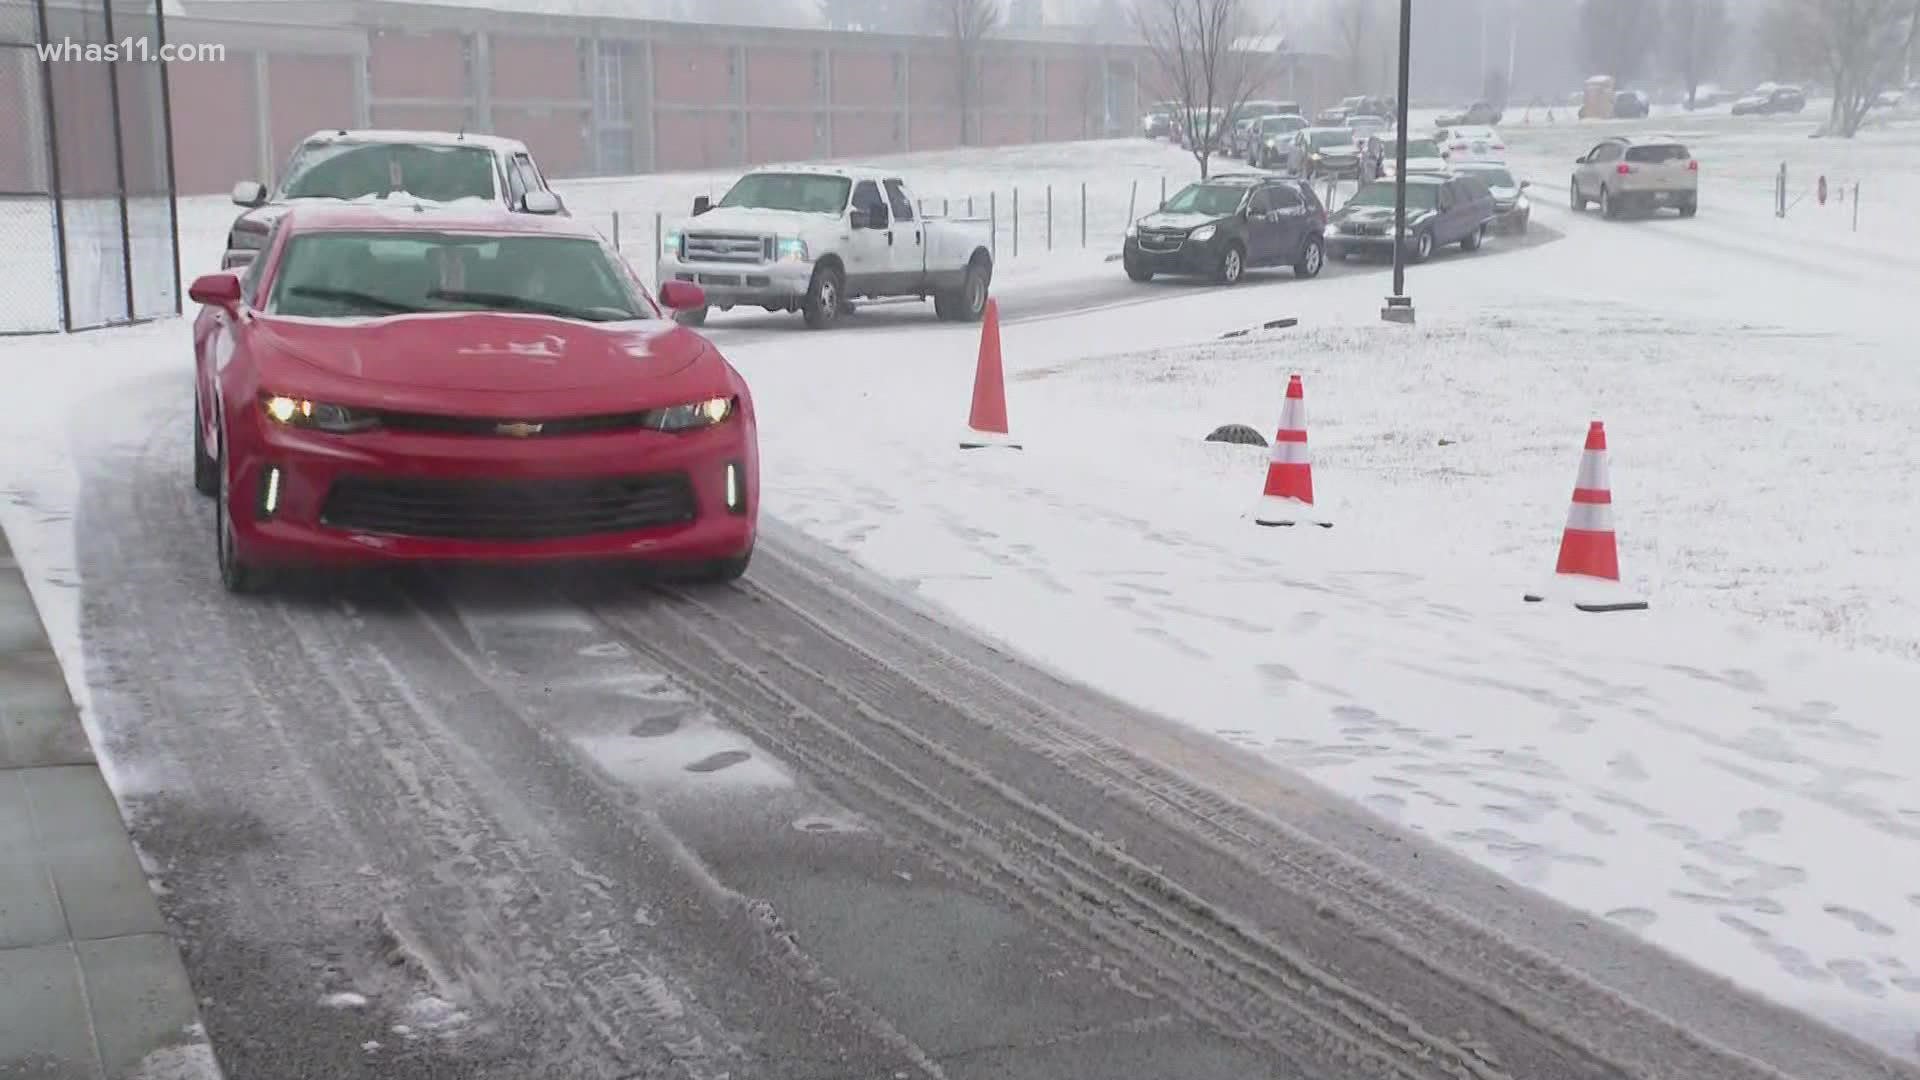 JCPS dismiss early after first snow of 2022 cause traffic headaches.